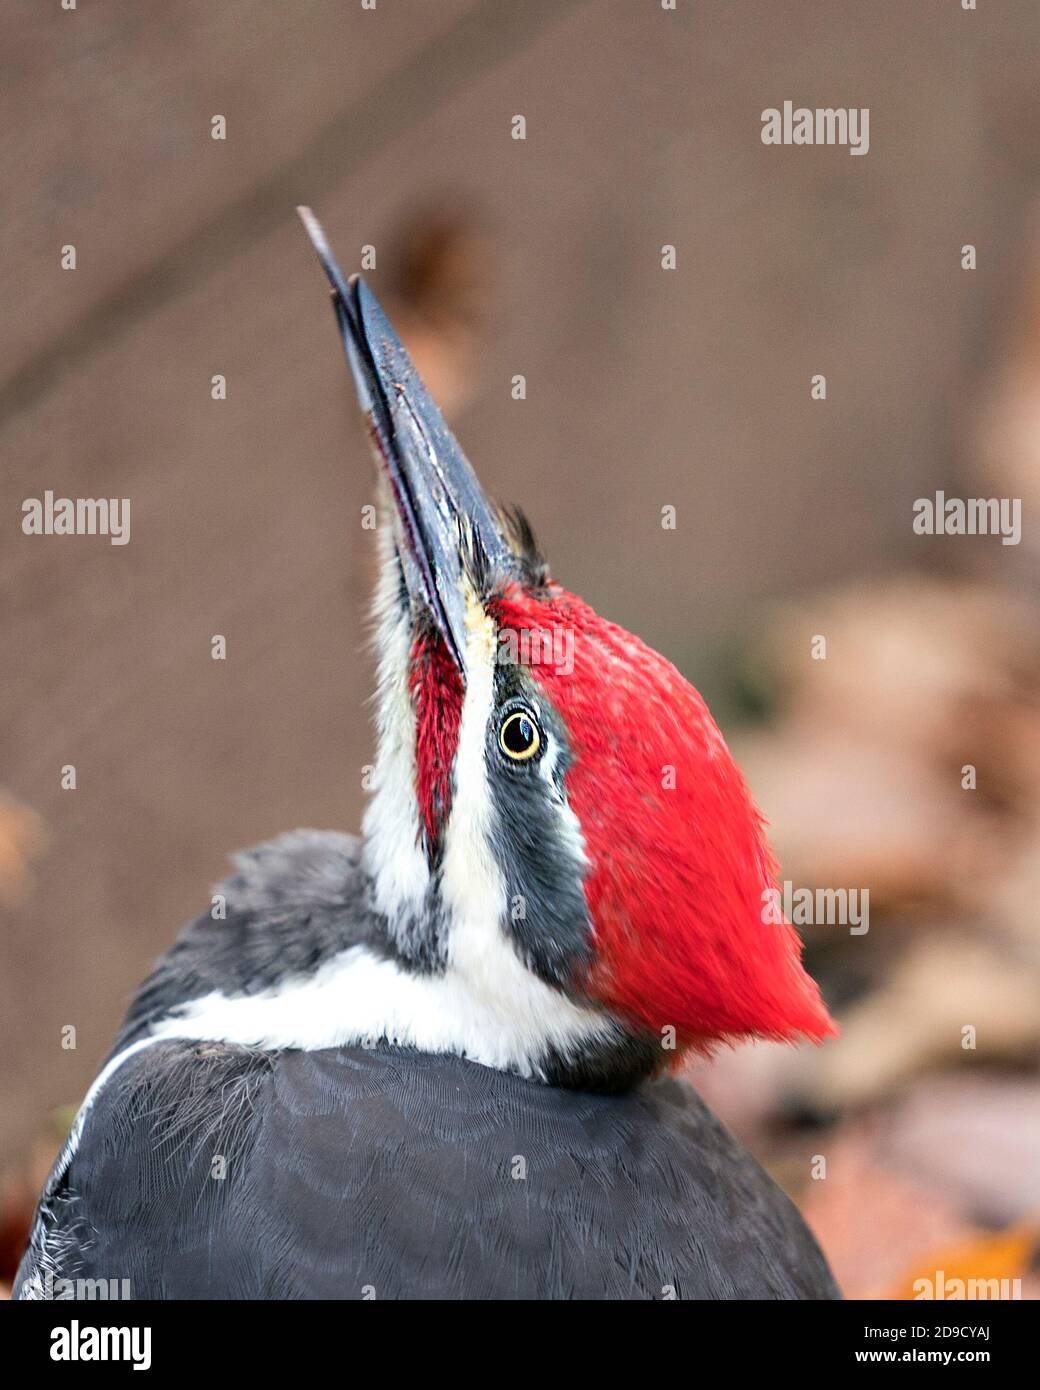 Woodpecker head close-up profile view with a blur background in its environment and habitat looking towards the sky. Stock Photo